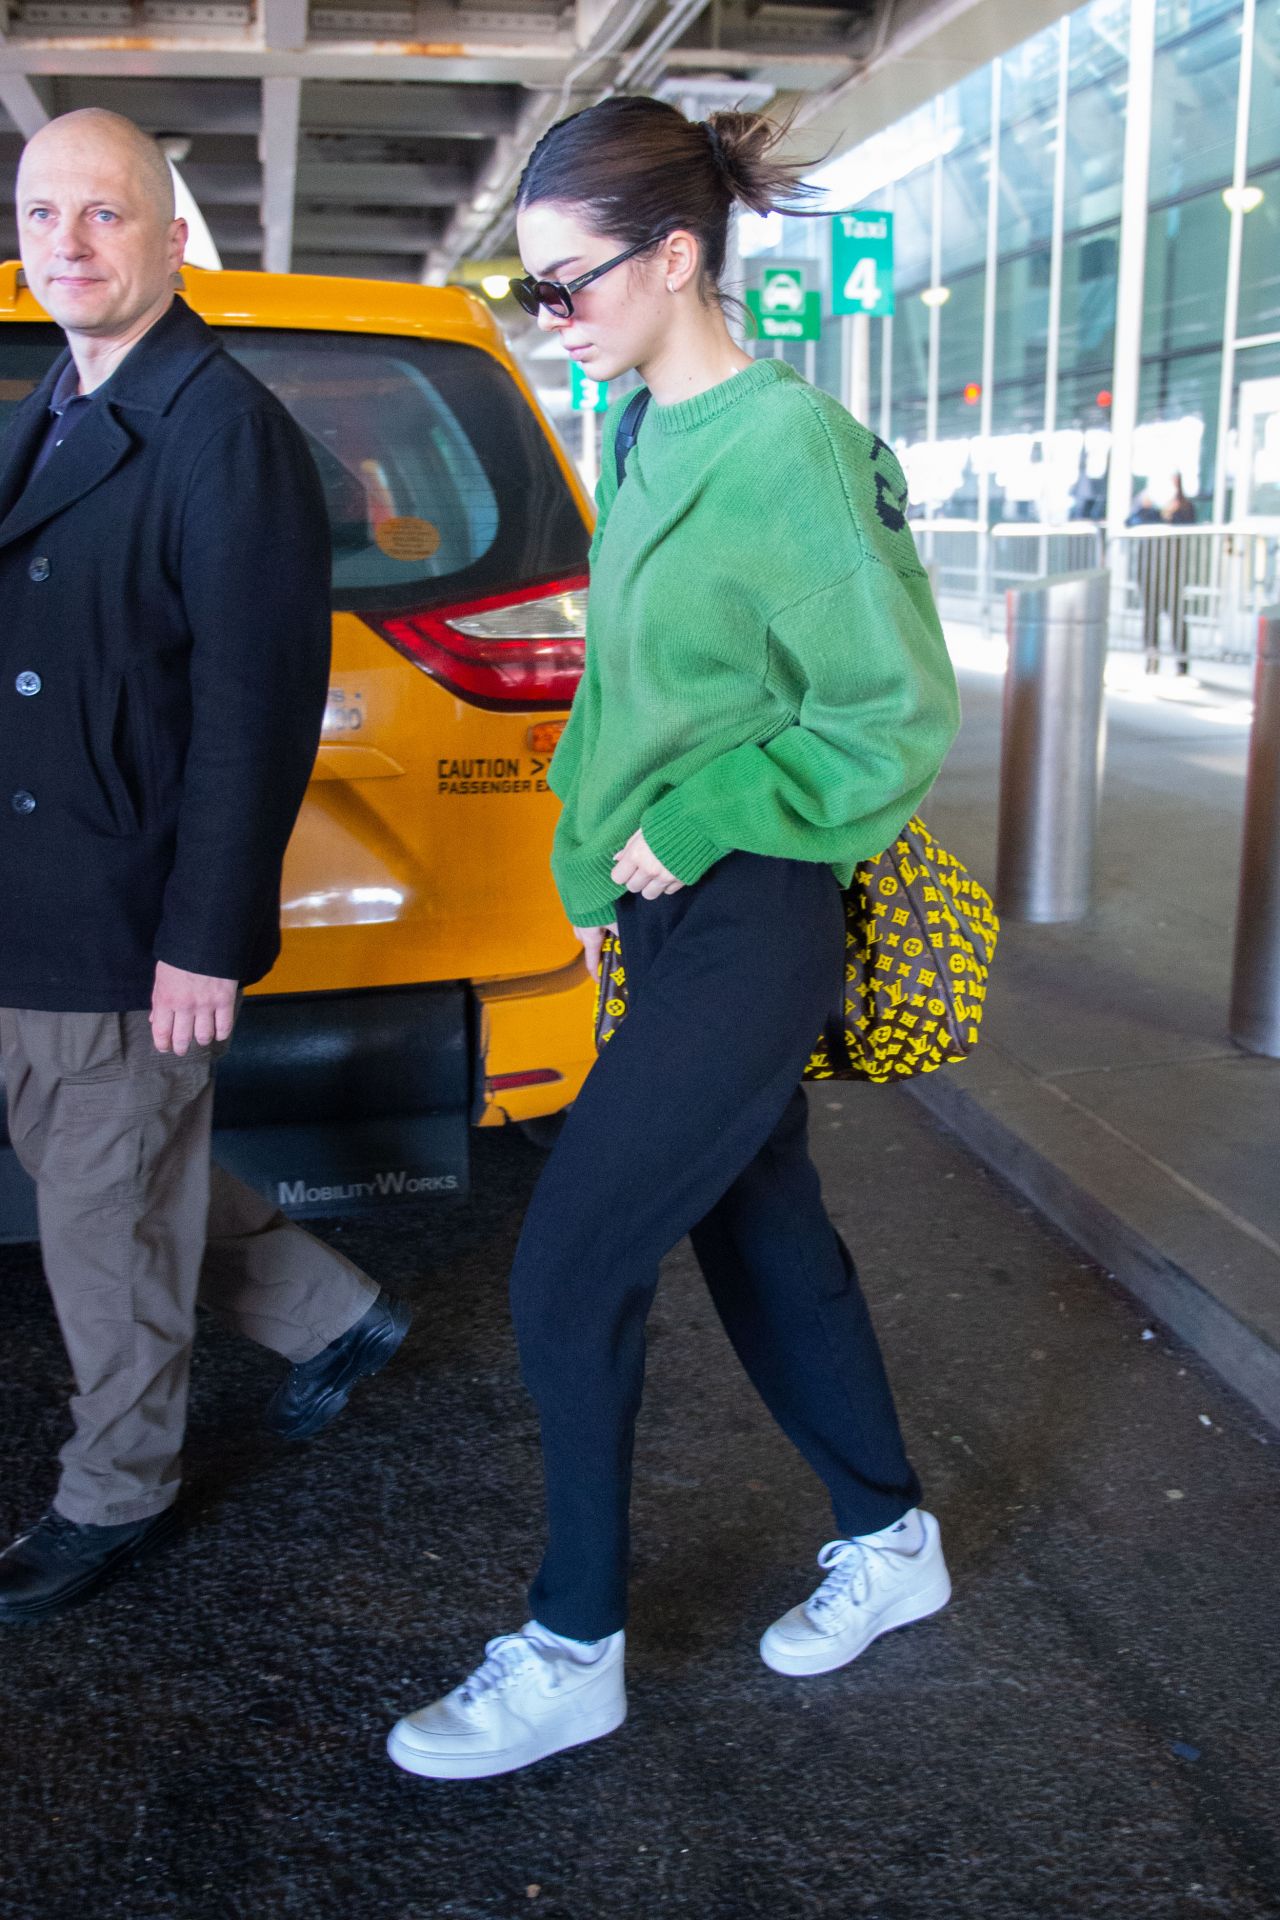 Kendall Jenner at JFK Airport March 25, 2011 – Star Style